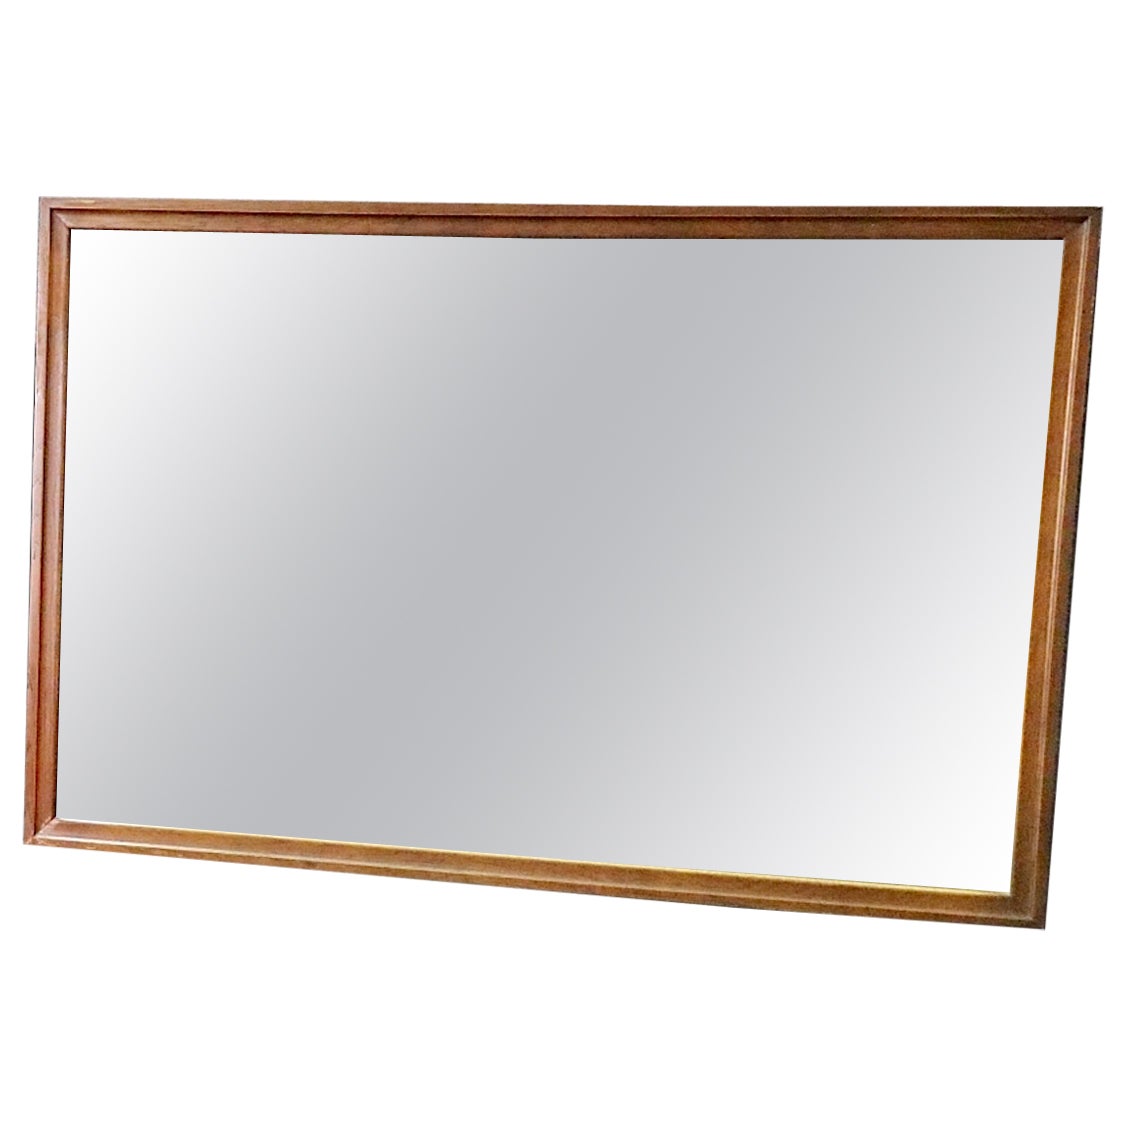 Four Foot Wall Mirror